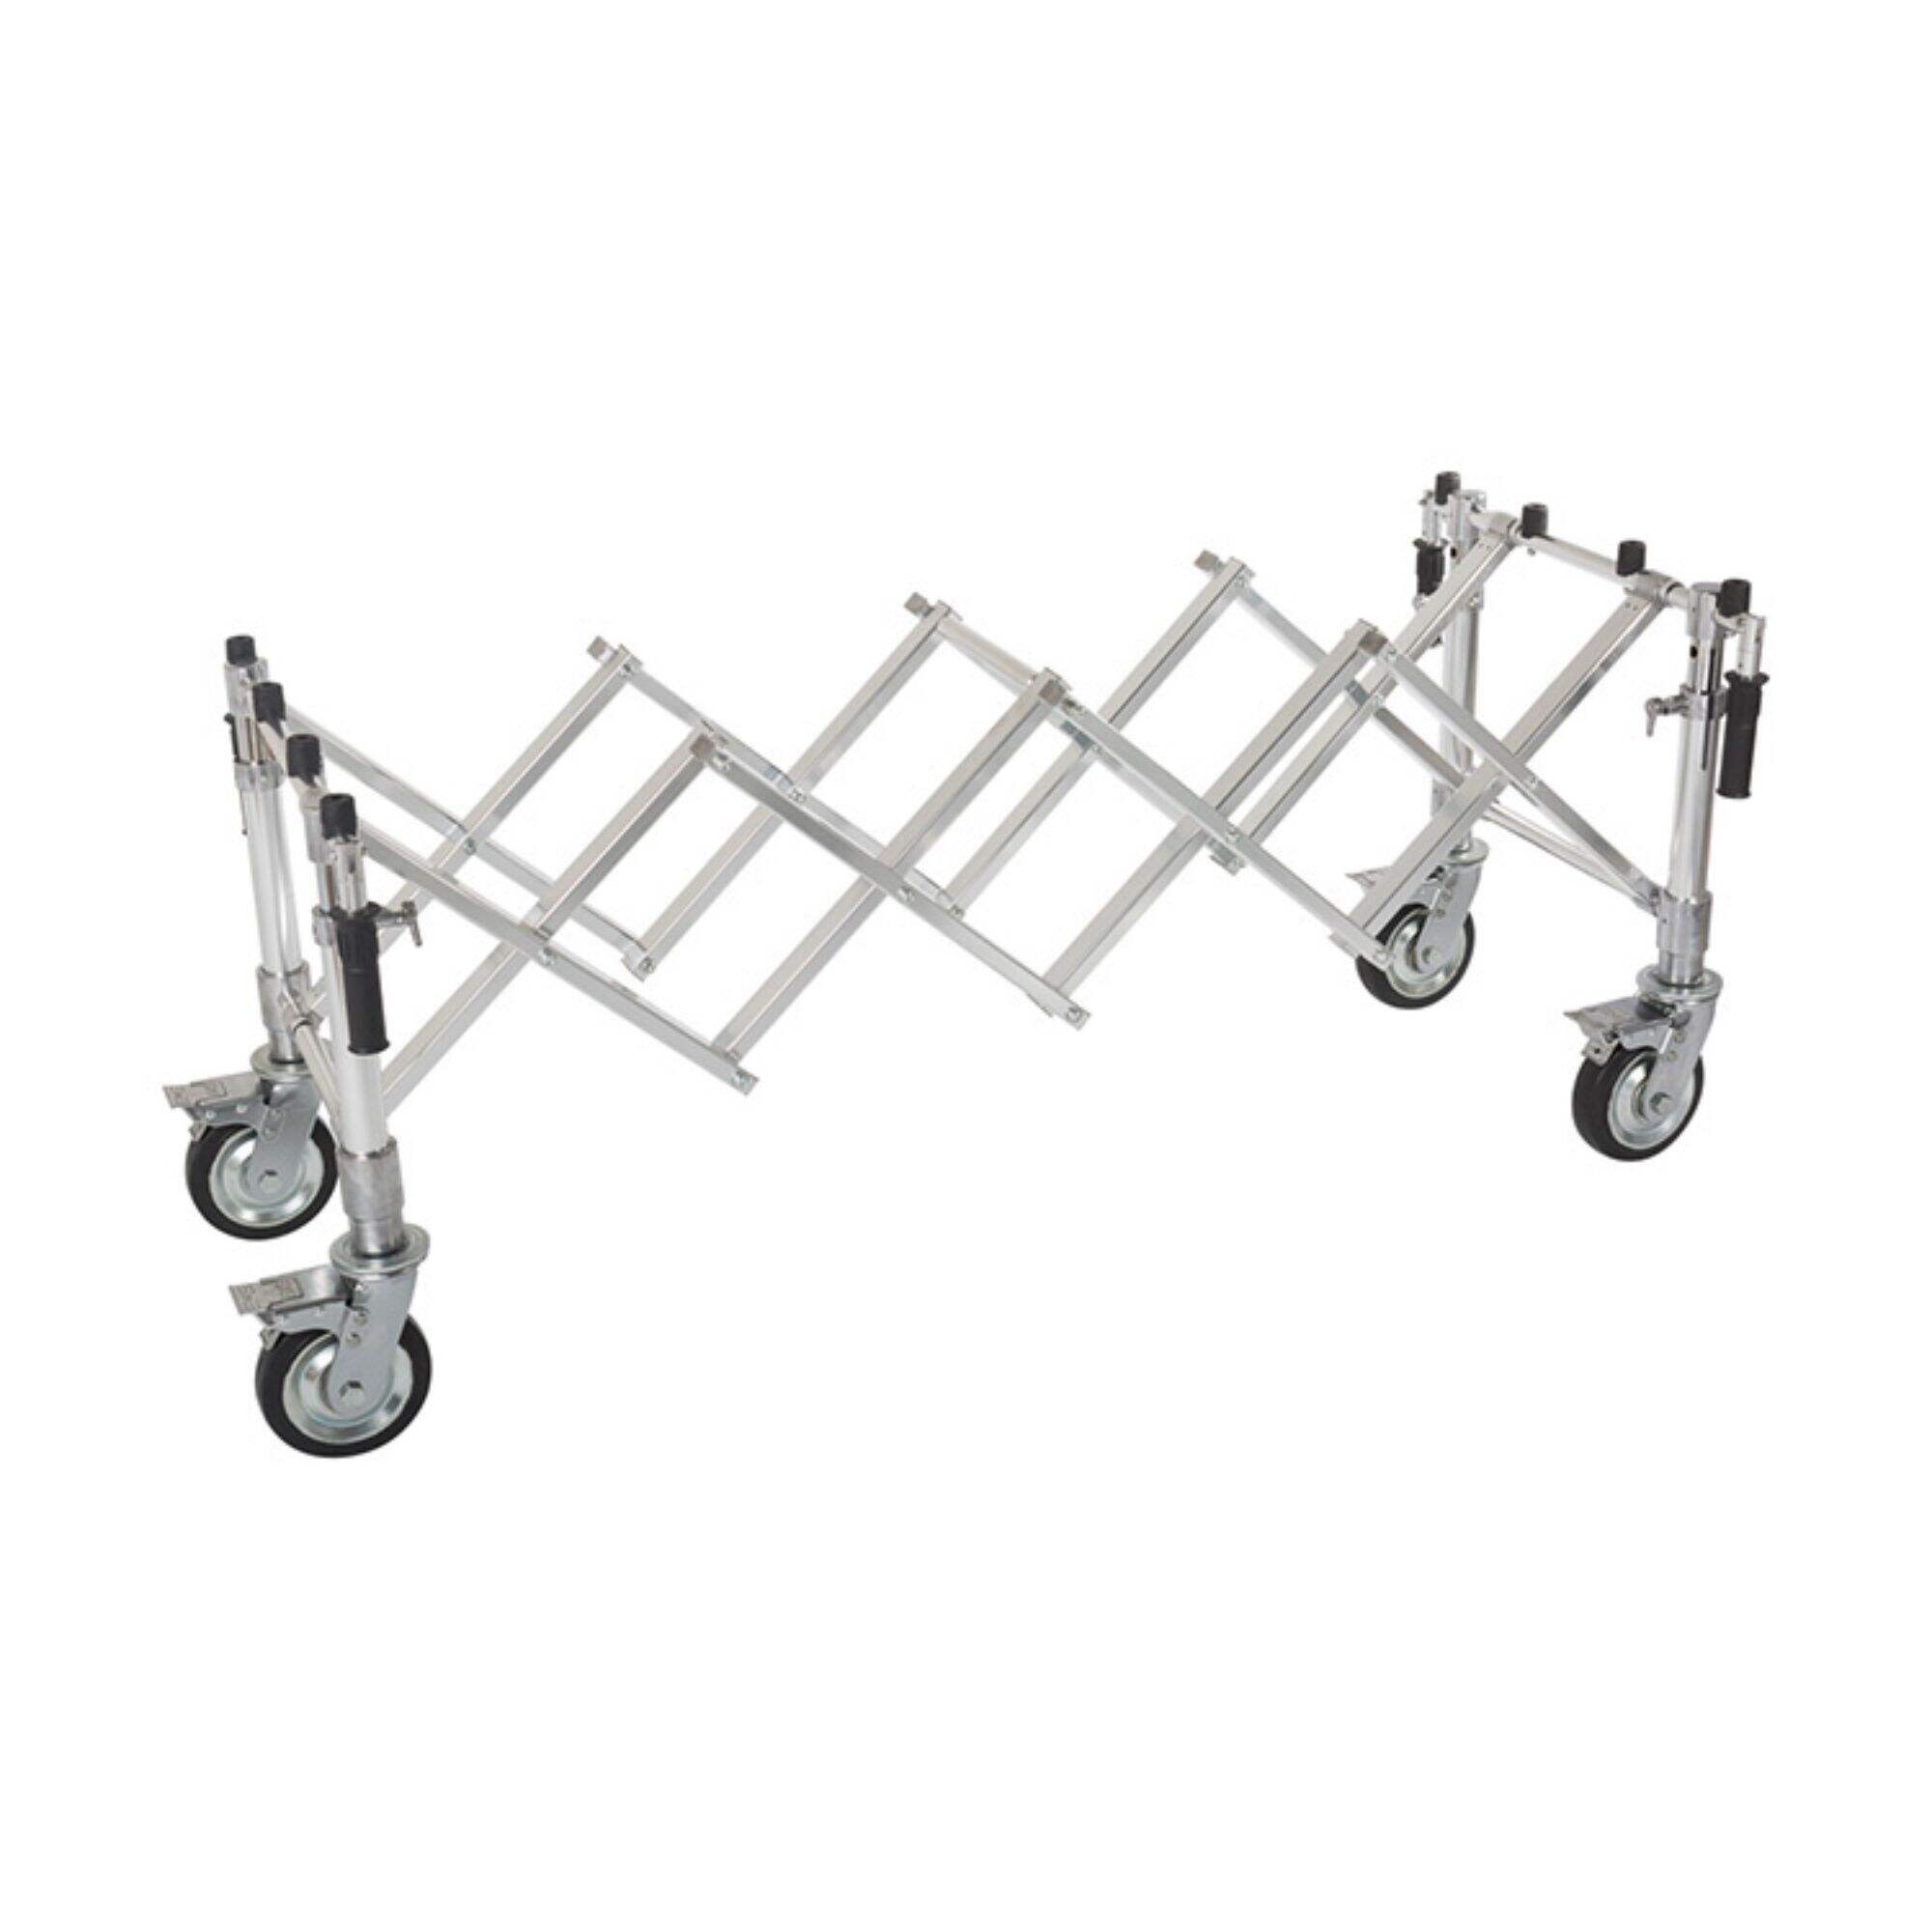 XH-7 Fold-out Carrying Handles Aluminum Alloy Church Truck